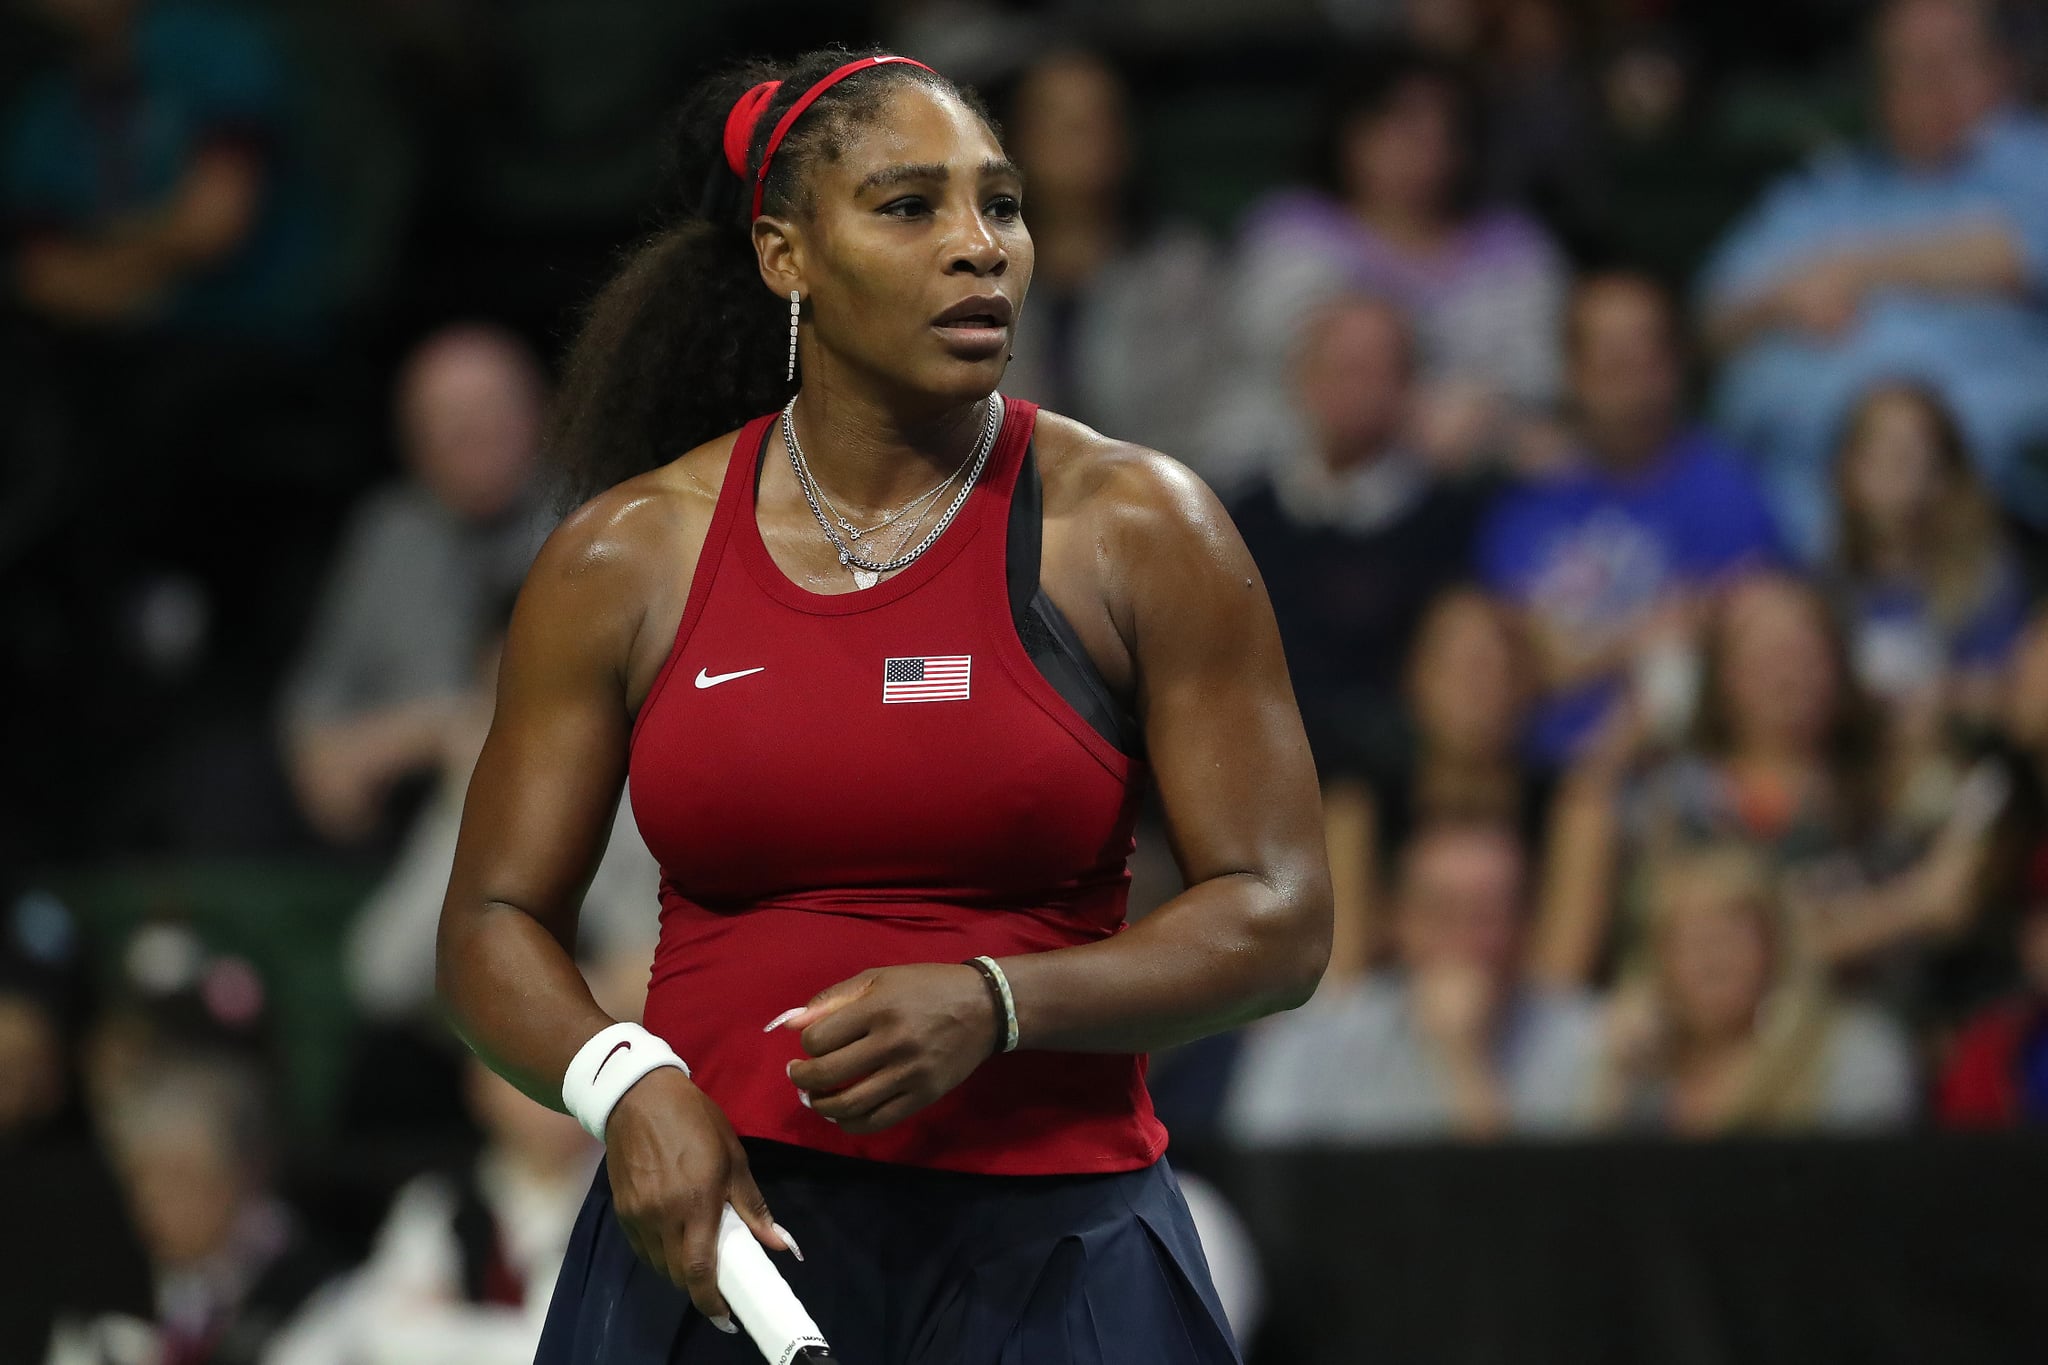 EVERETT, WASHINGTON - FEBRUARY 08: Serena Williams of USA reacts while competing against Anastasija Sevastova of Latvia during the 2020 Fed Cup qualifier between USA and Latvia at Angel of the Winds Arena on February 08, 2020 in Everett, Washington. (Photo by Abbie Parr/Getty Images)